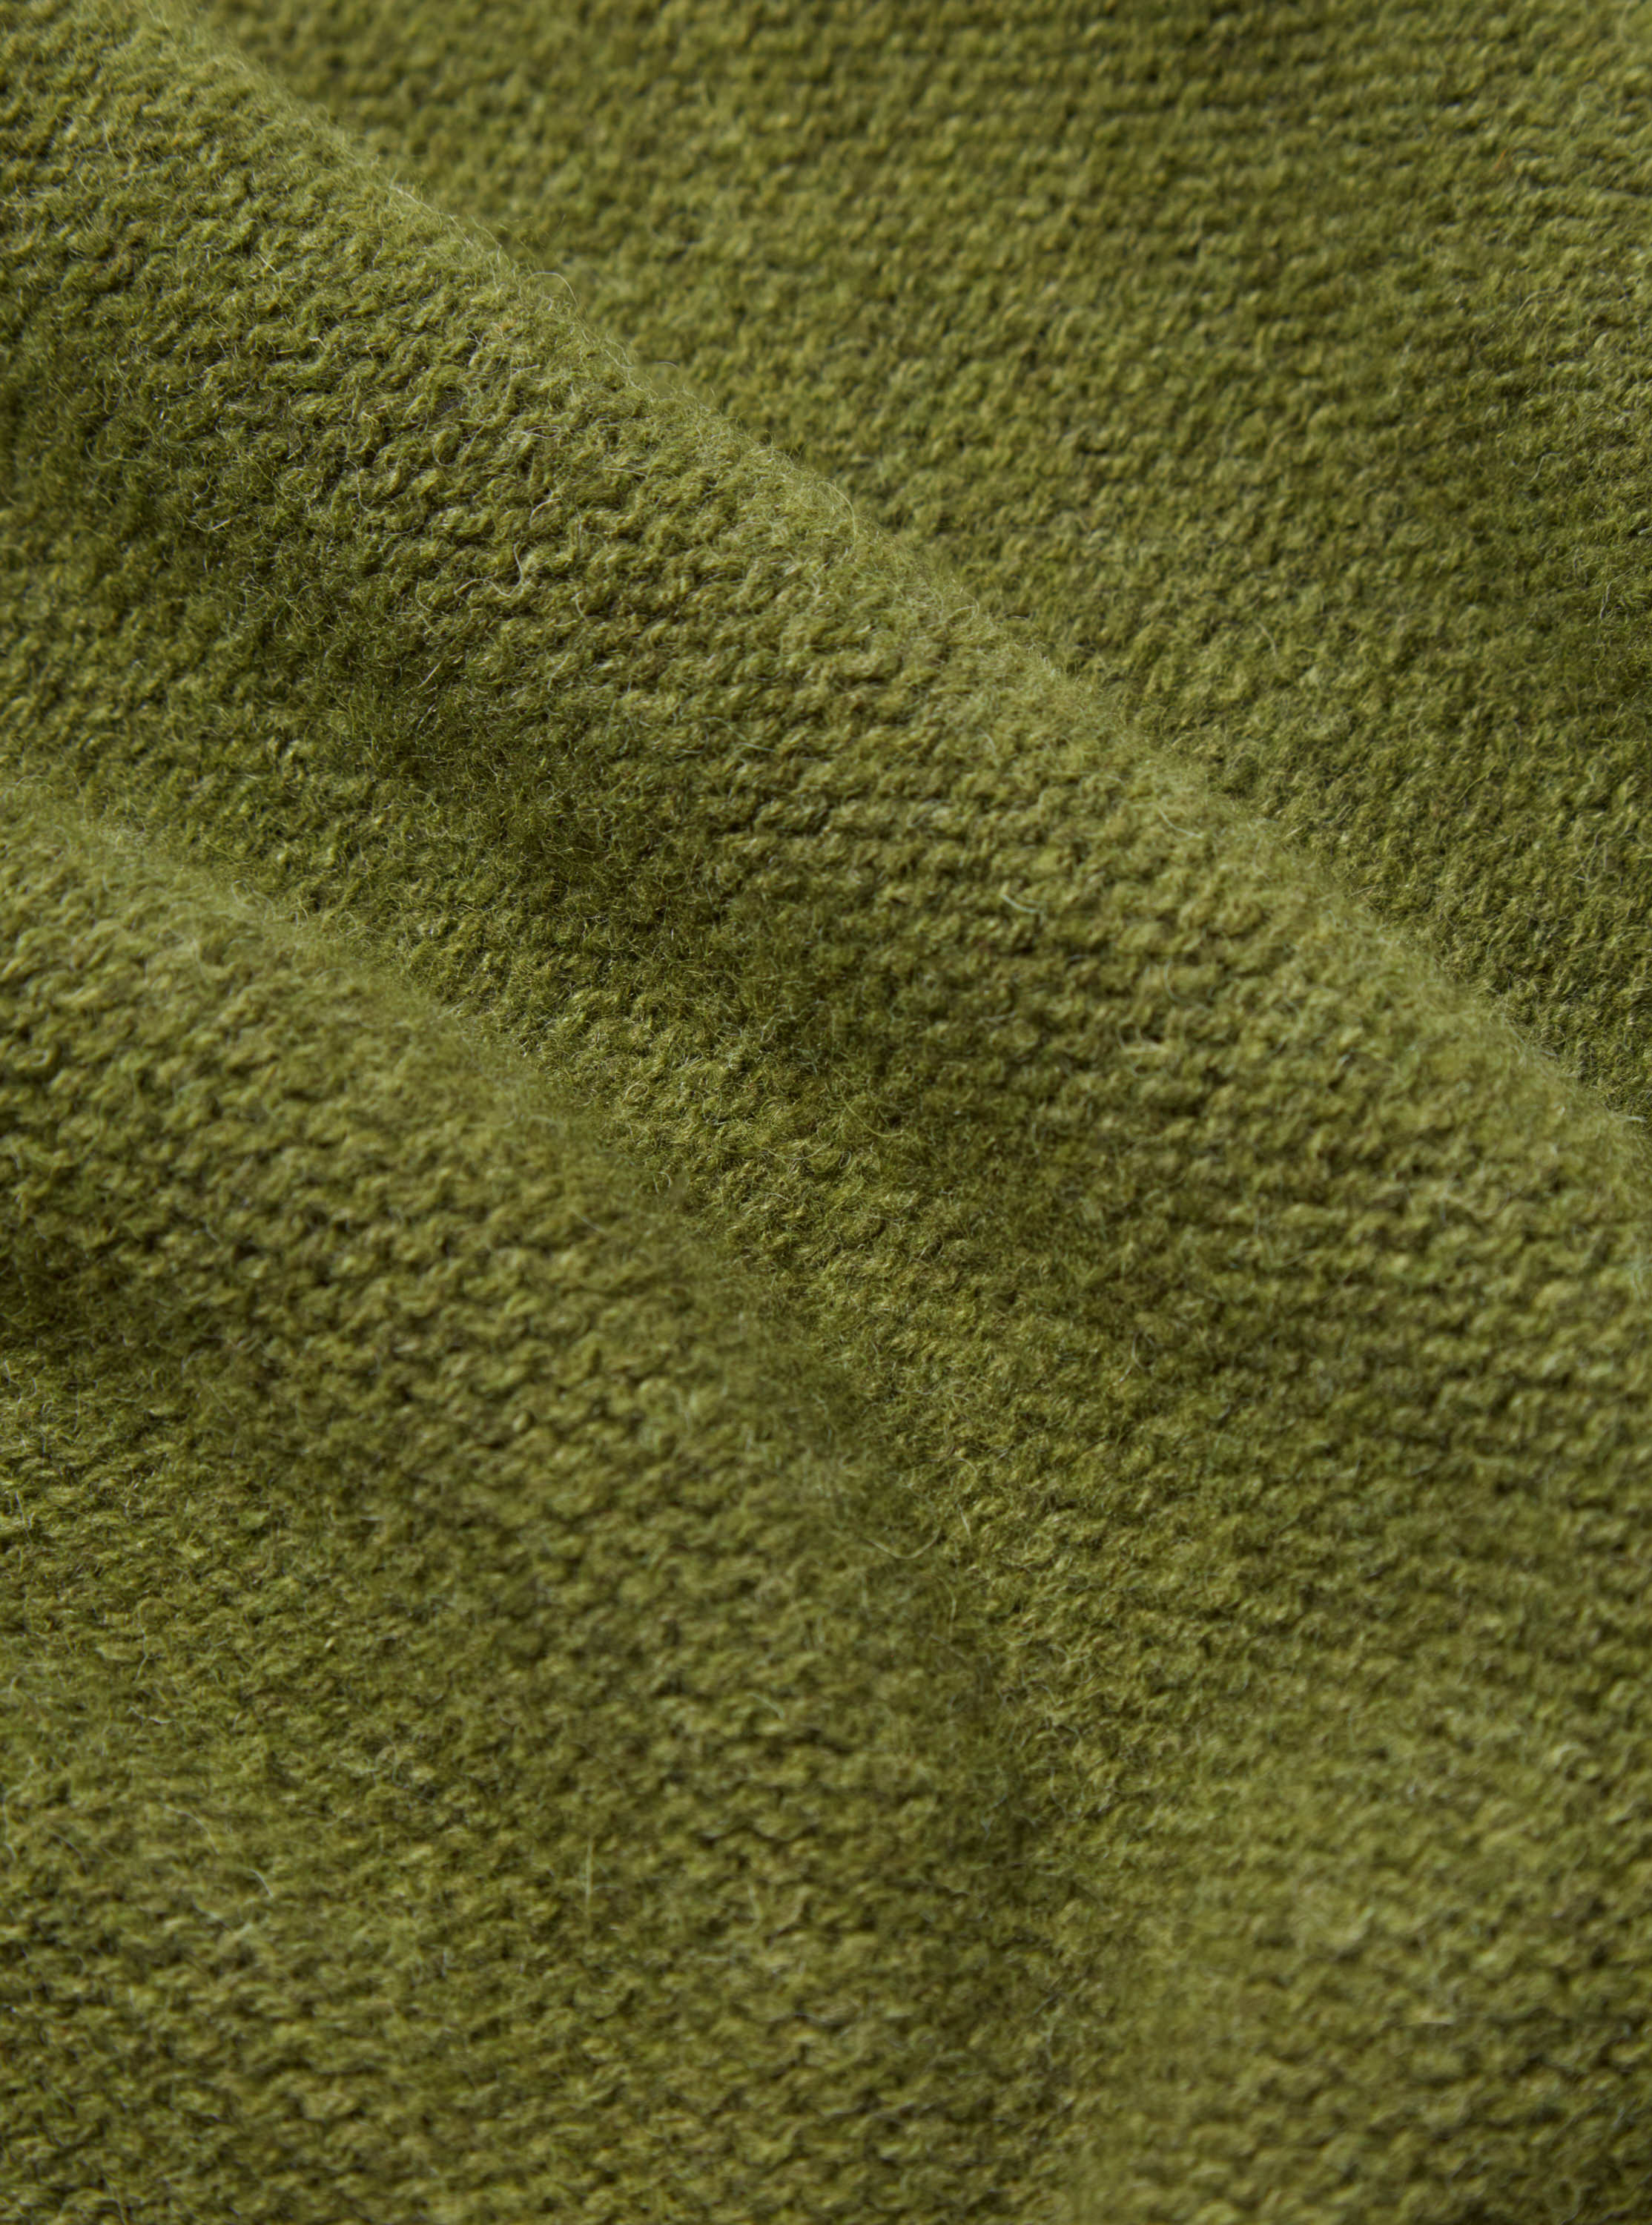 Universal Works Seamless Crew in Green Supersoft Knit